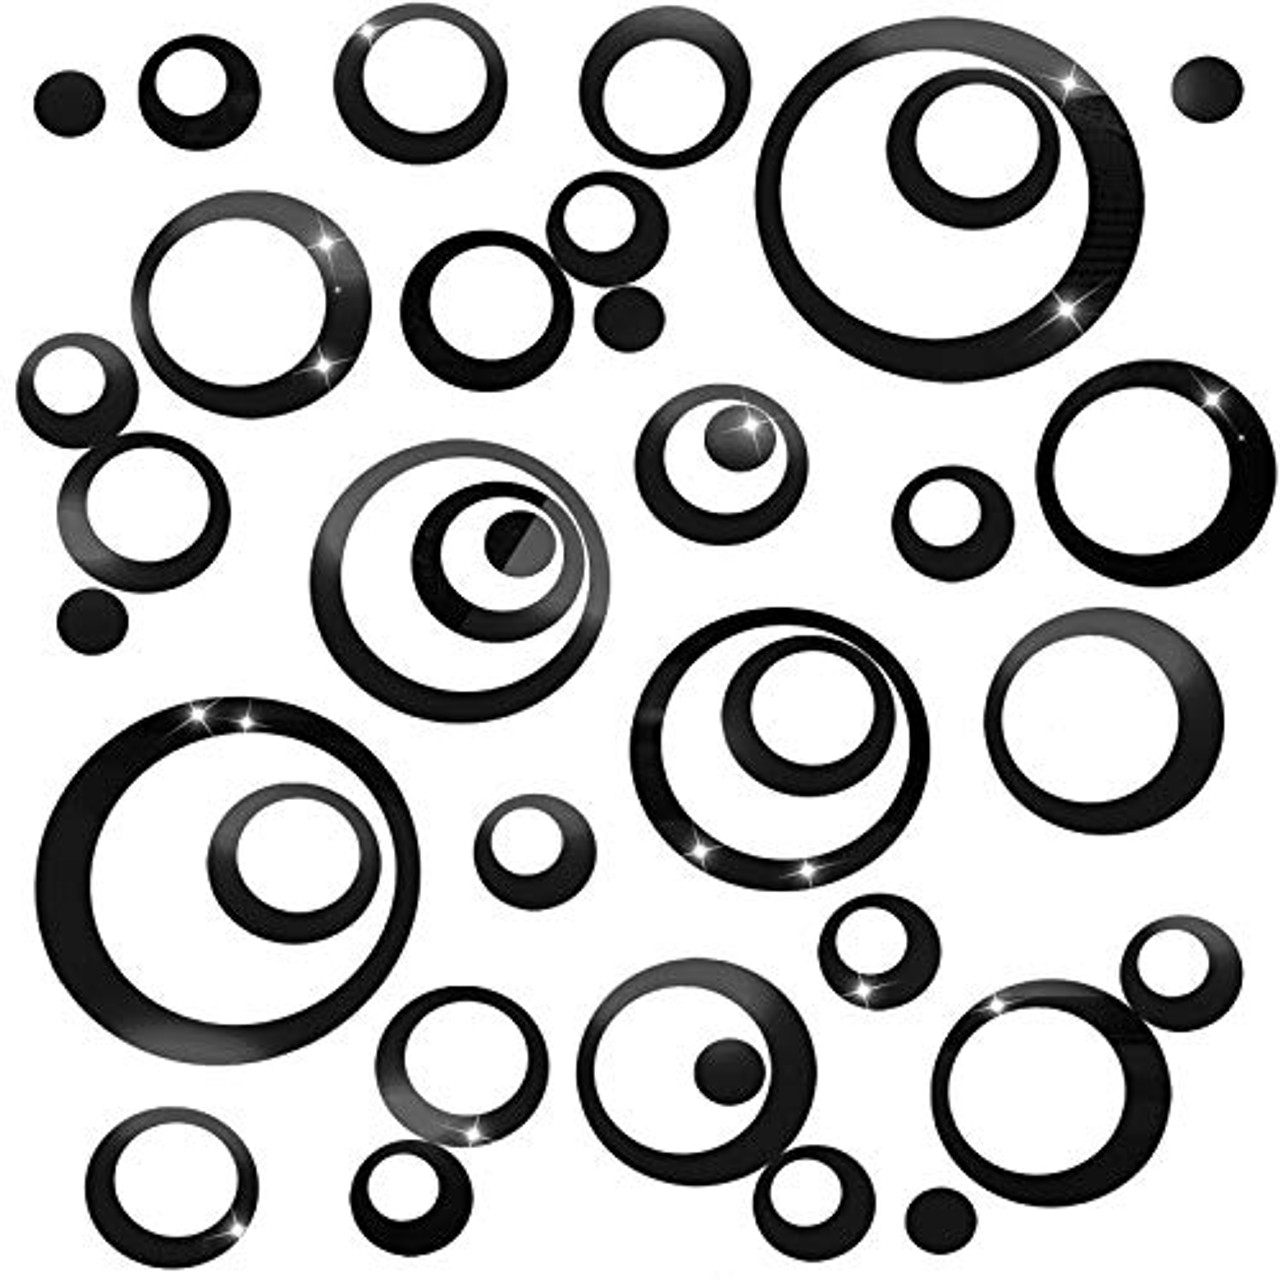 Details about   48 Pieces Acrylic Circle Mirror Wall Stickers Round Dots Mirror Black and Red 